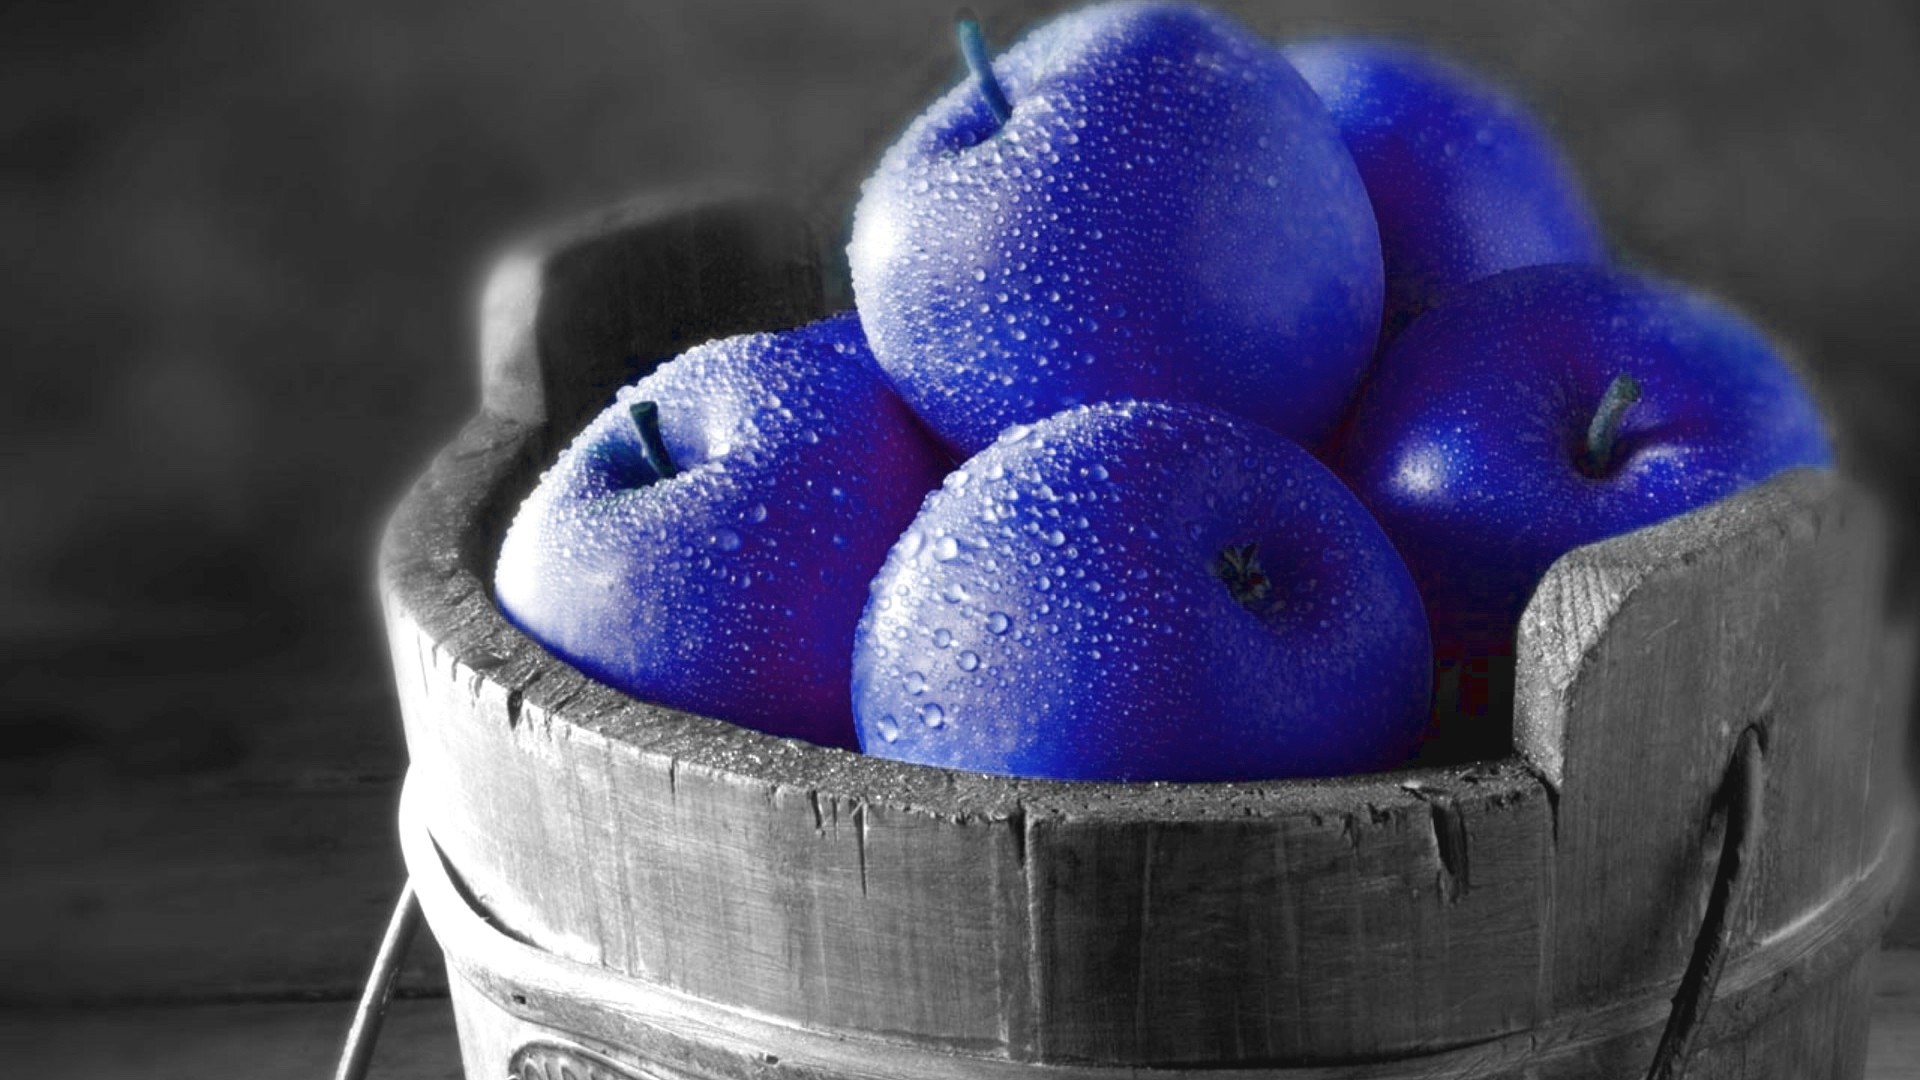 General 1920x1080 selective coloring apples fruit photo manipulation blue food